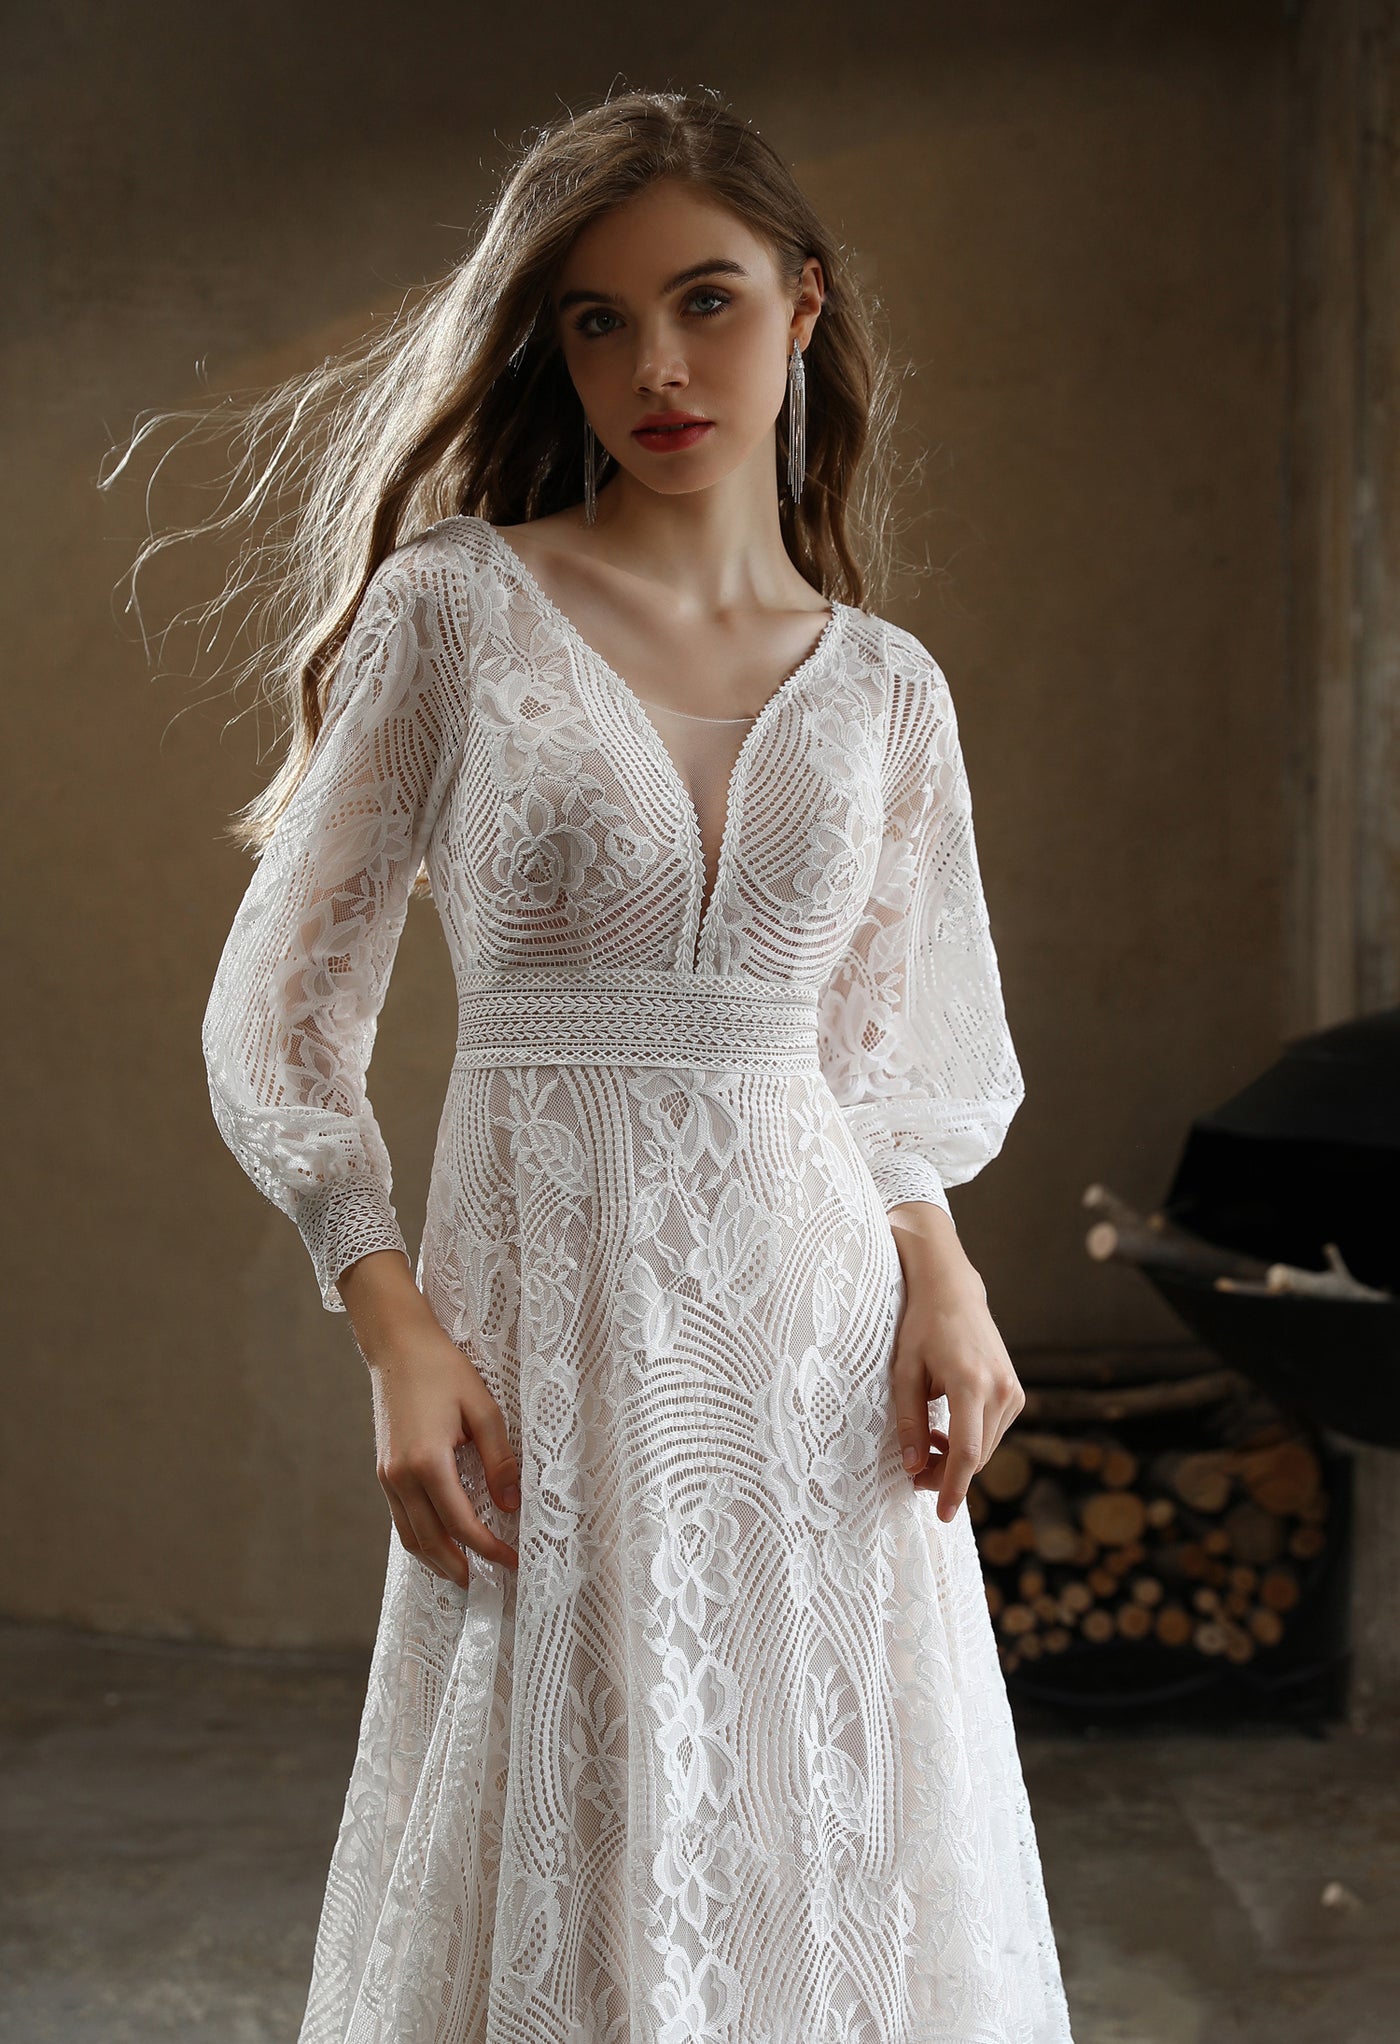 A woman in a Plunging V-neck Lace Long Sleeve Bohemian Wedding Gown by Bergamot Bridal is standing in front of a fireplace.